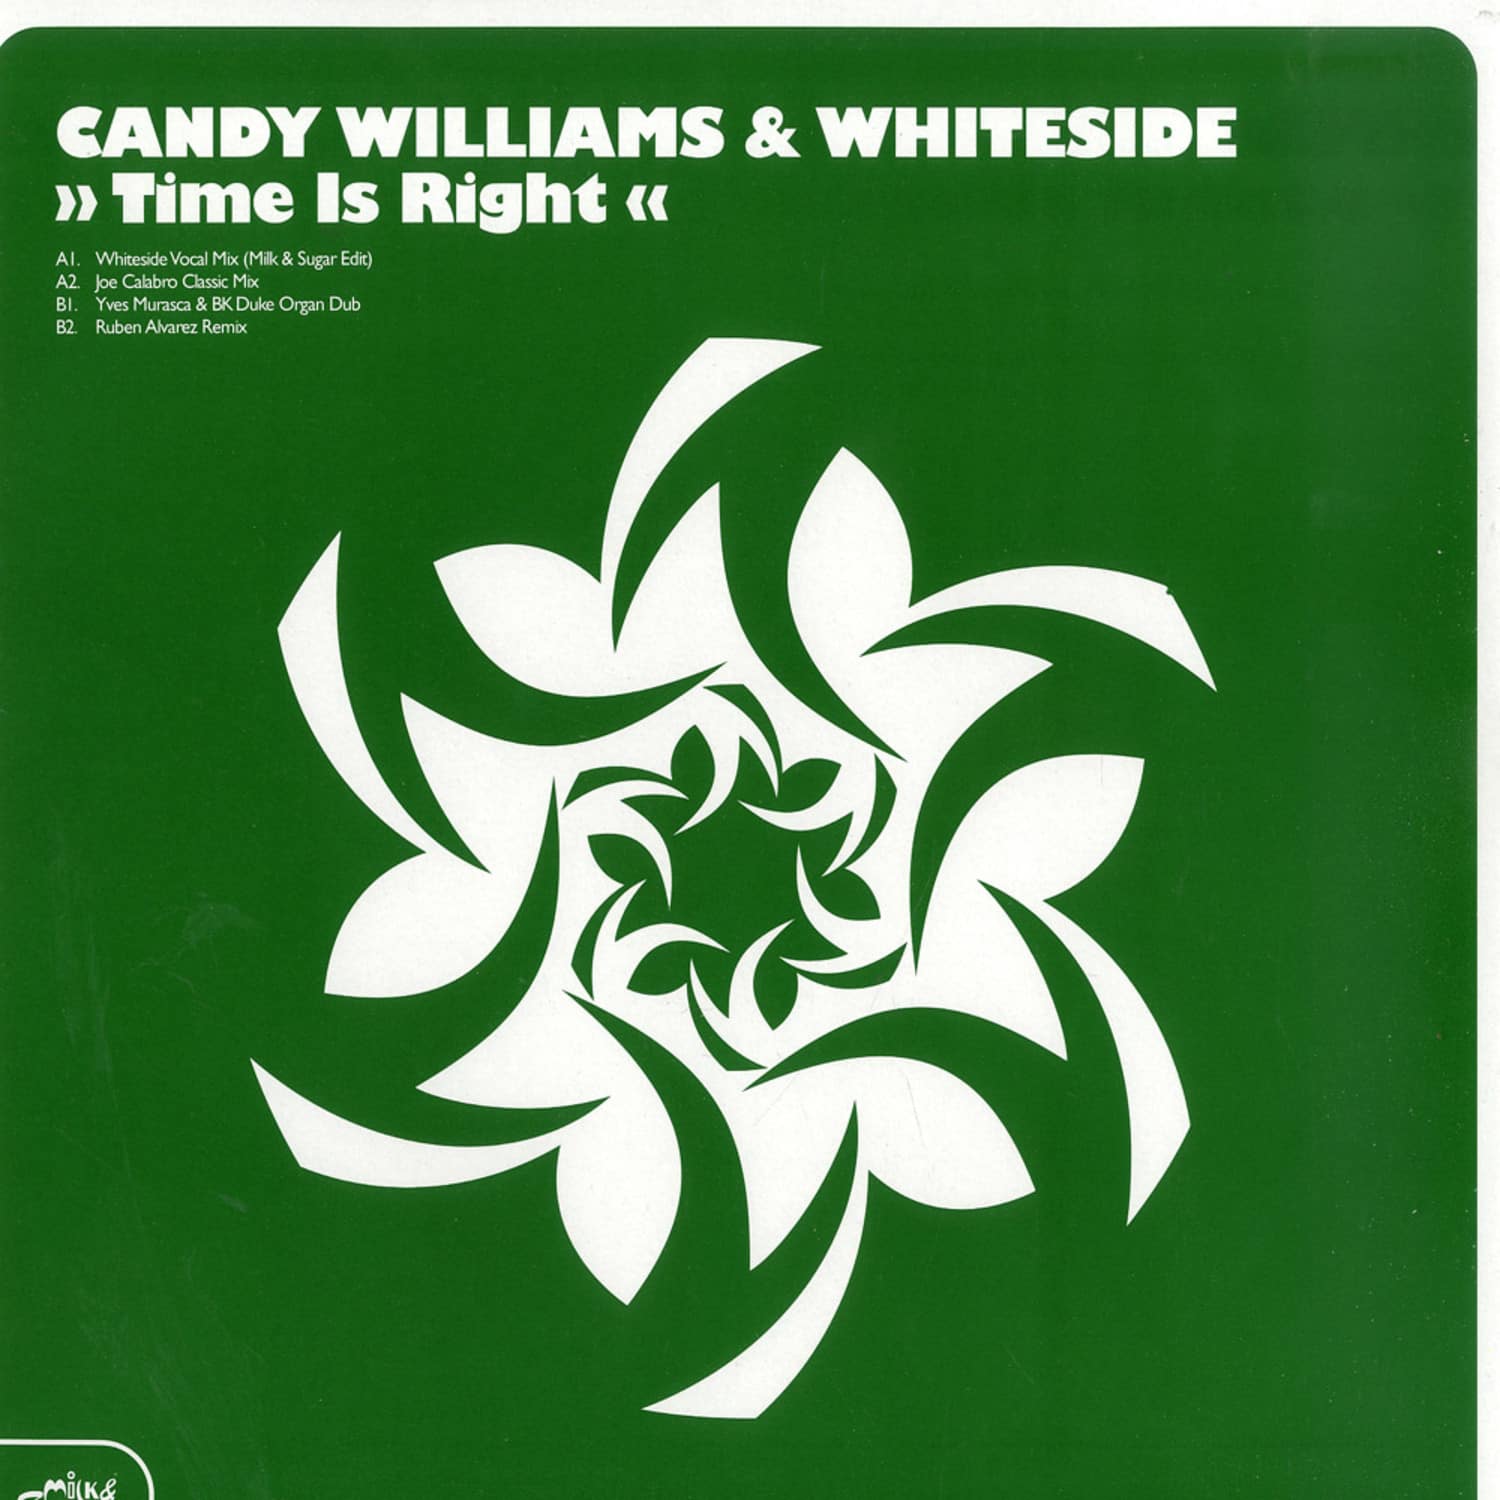 Candy Williams & Whiteside - TIME IS RIGHT